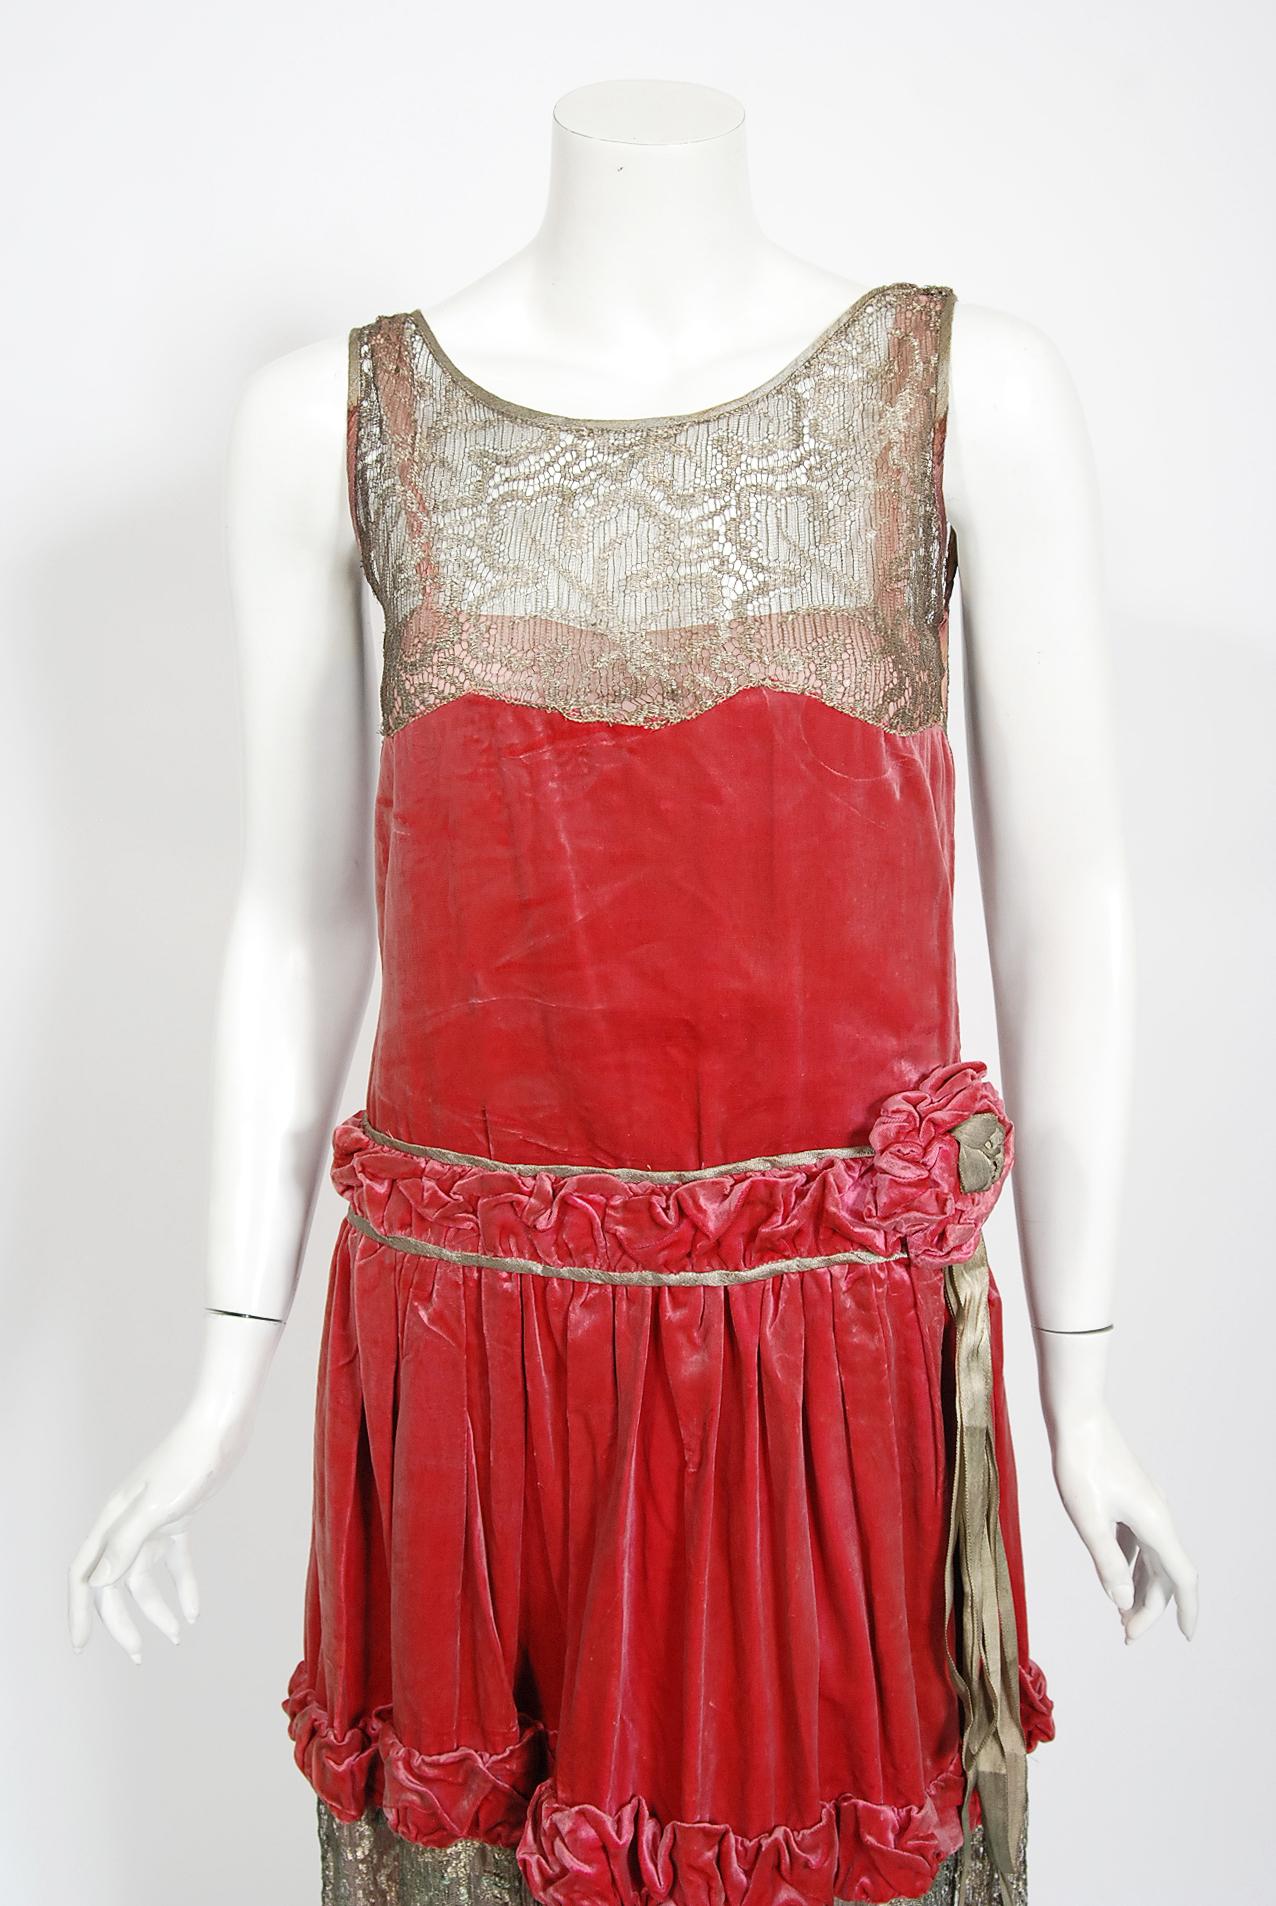 A gorgeous 1920's magenta pink dress by 'Bedell of New York' which was one of the high-end custom boutiques operating during the Art-Deco era. Vibrant flapper dresses from this decade are perennial favorites and this one is a show-stopper. The